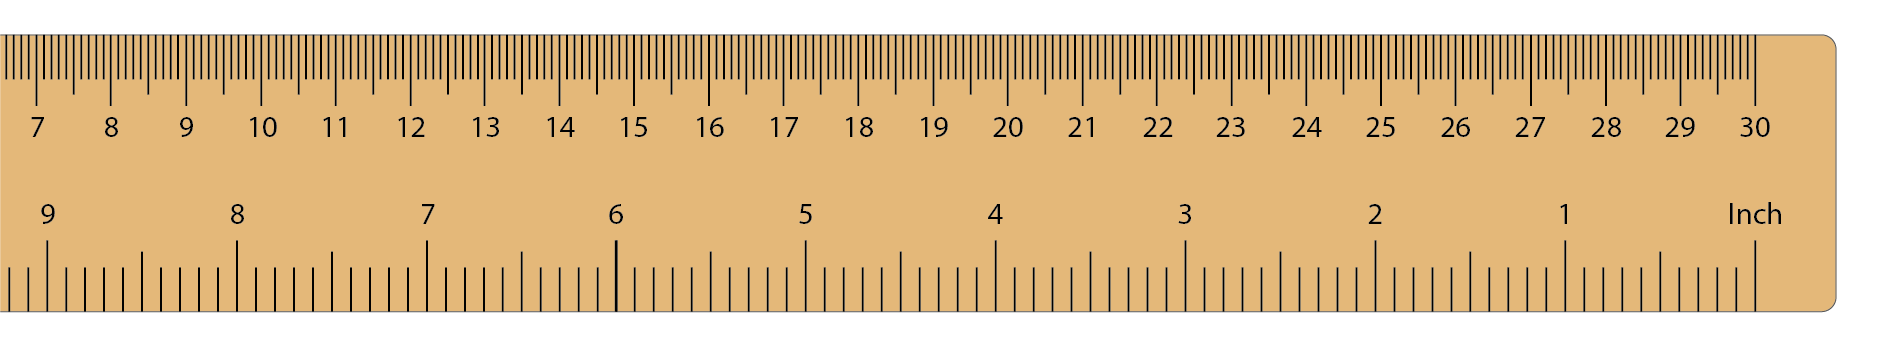 Image of a ruler that starts at the 6.5 cm mark.